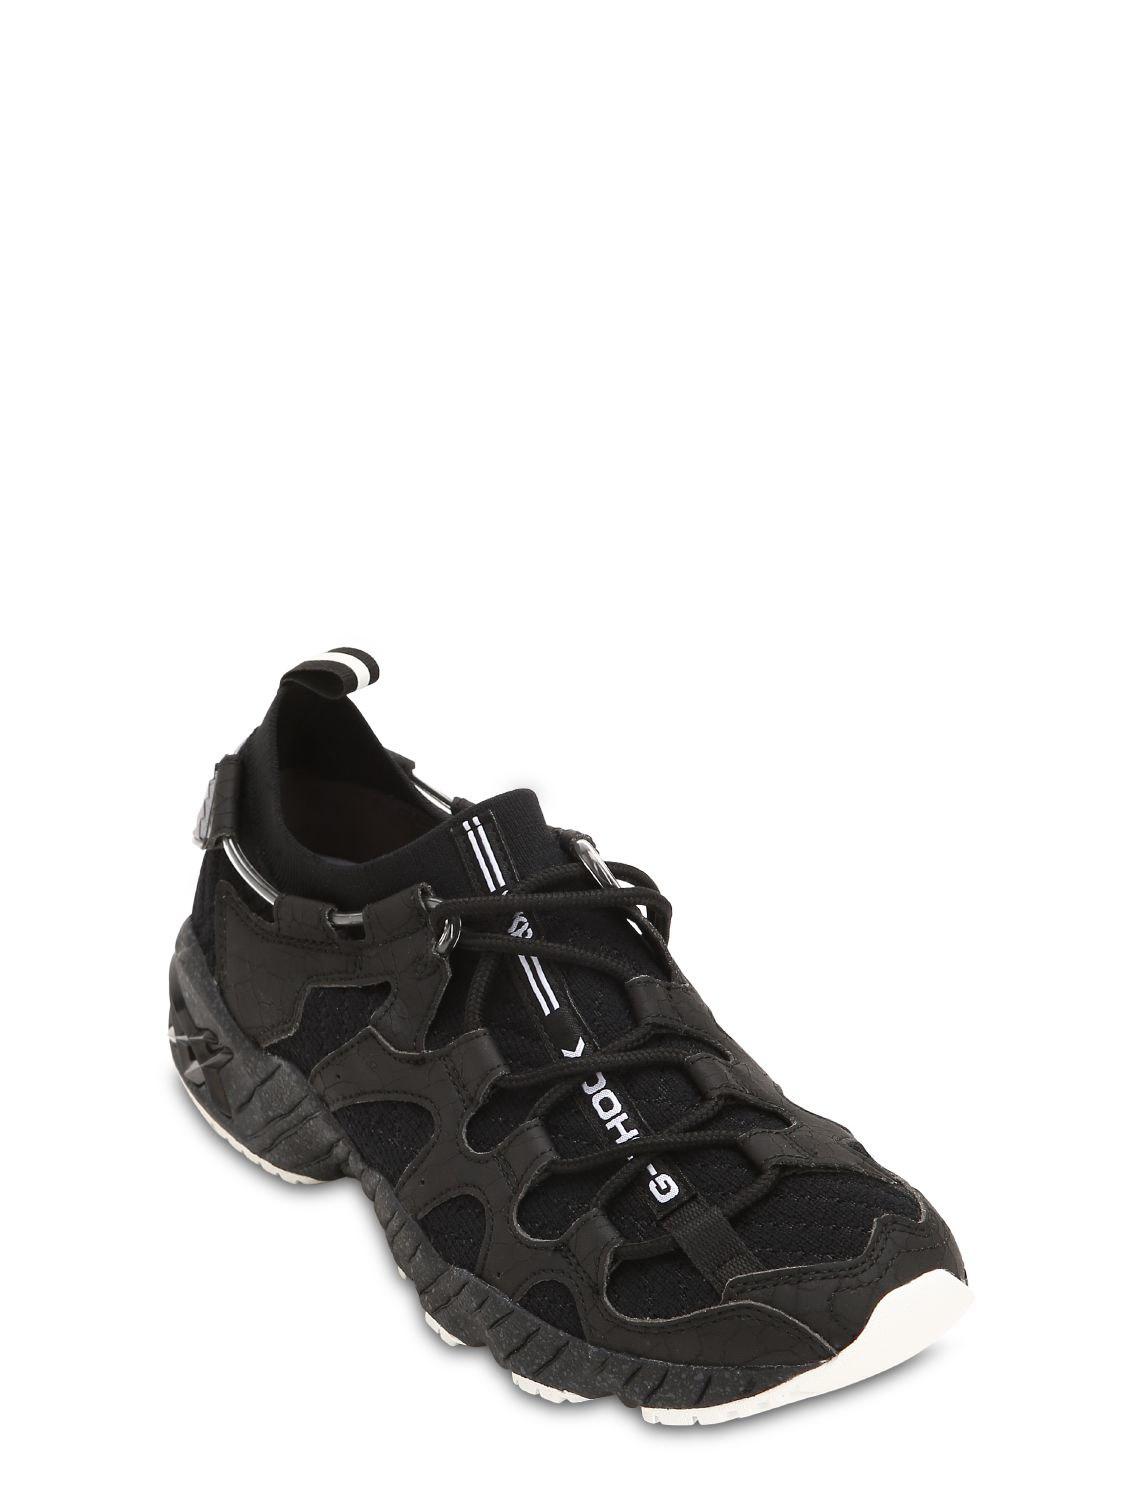 Asics Leather Gel Mai X Casio G-shock Sneakers in Black for Men - Lyst